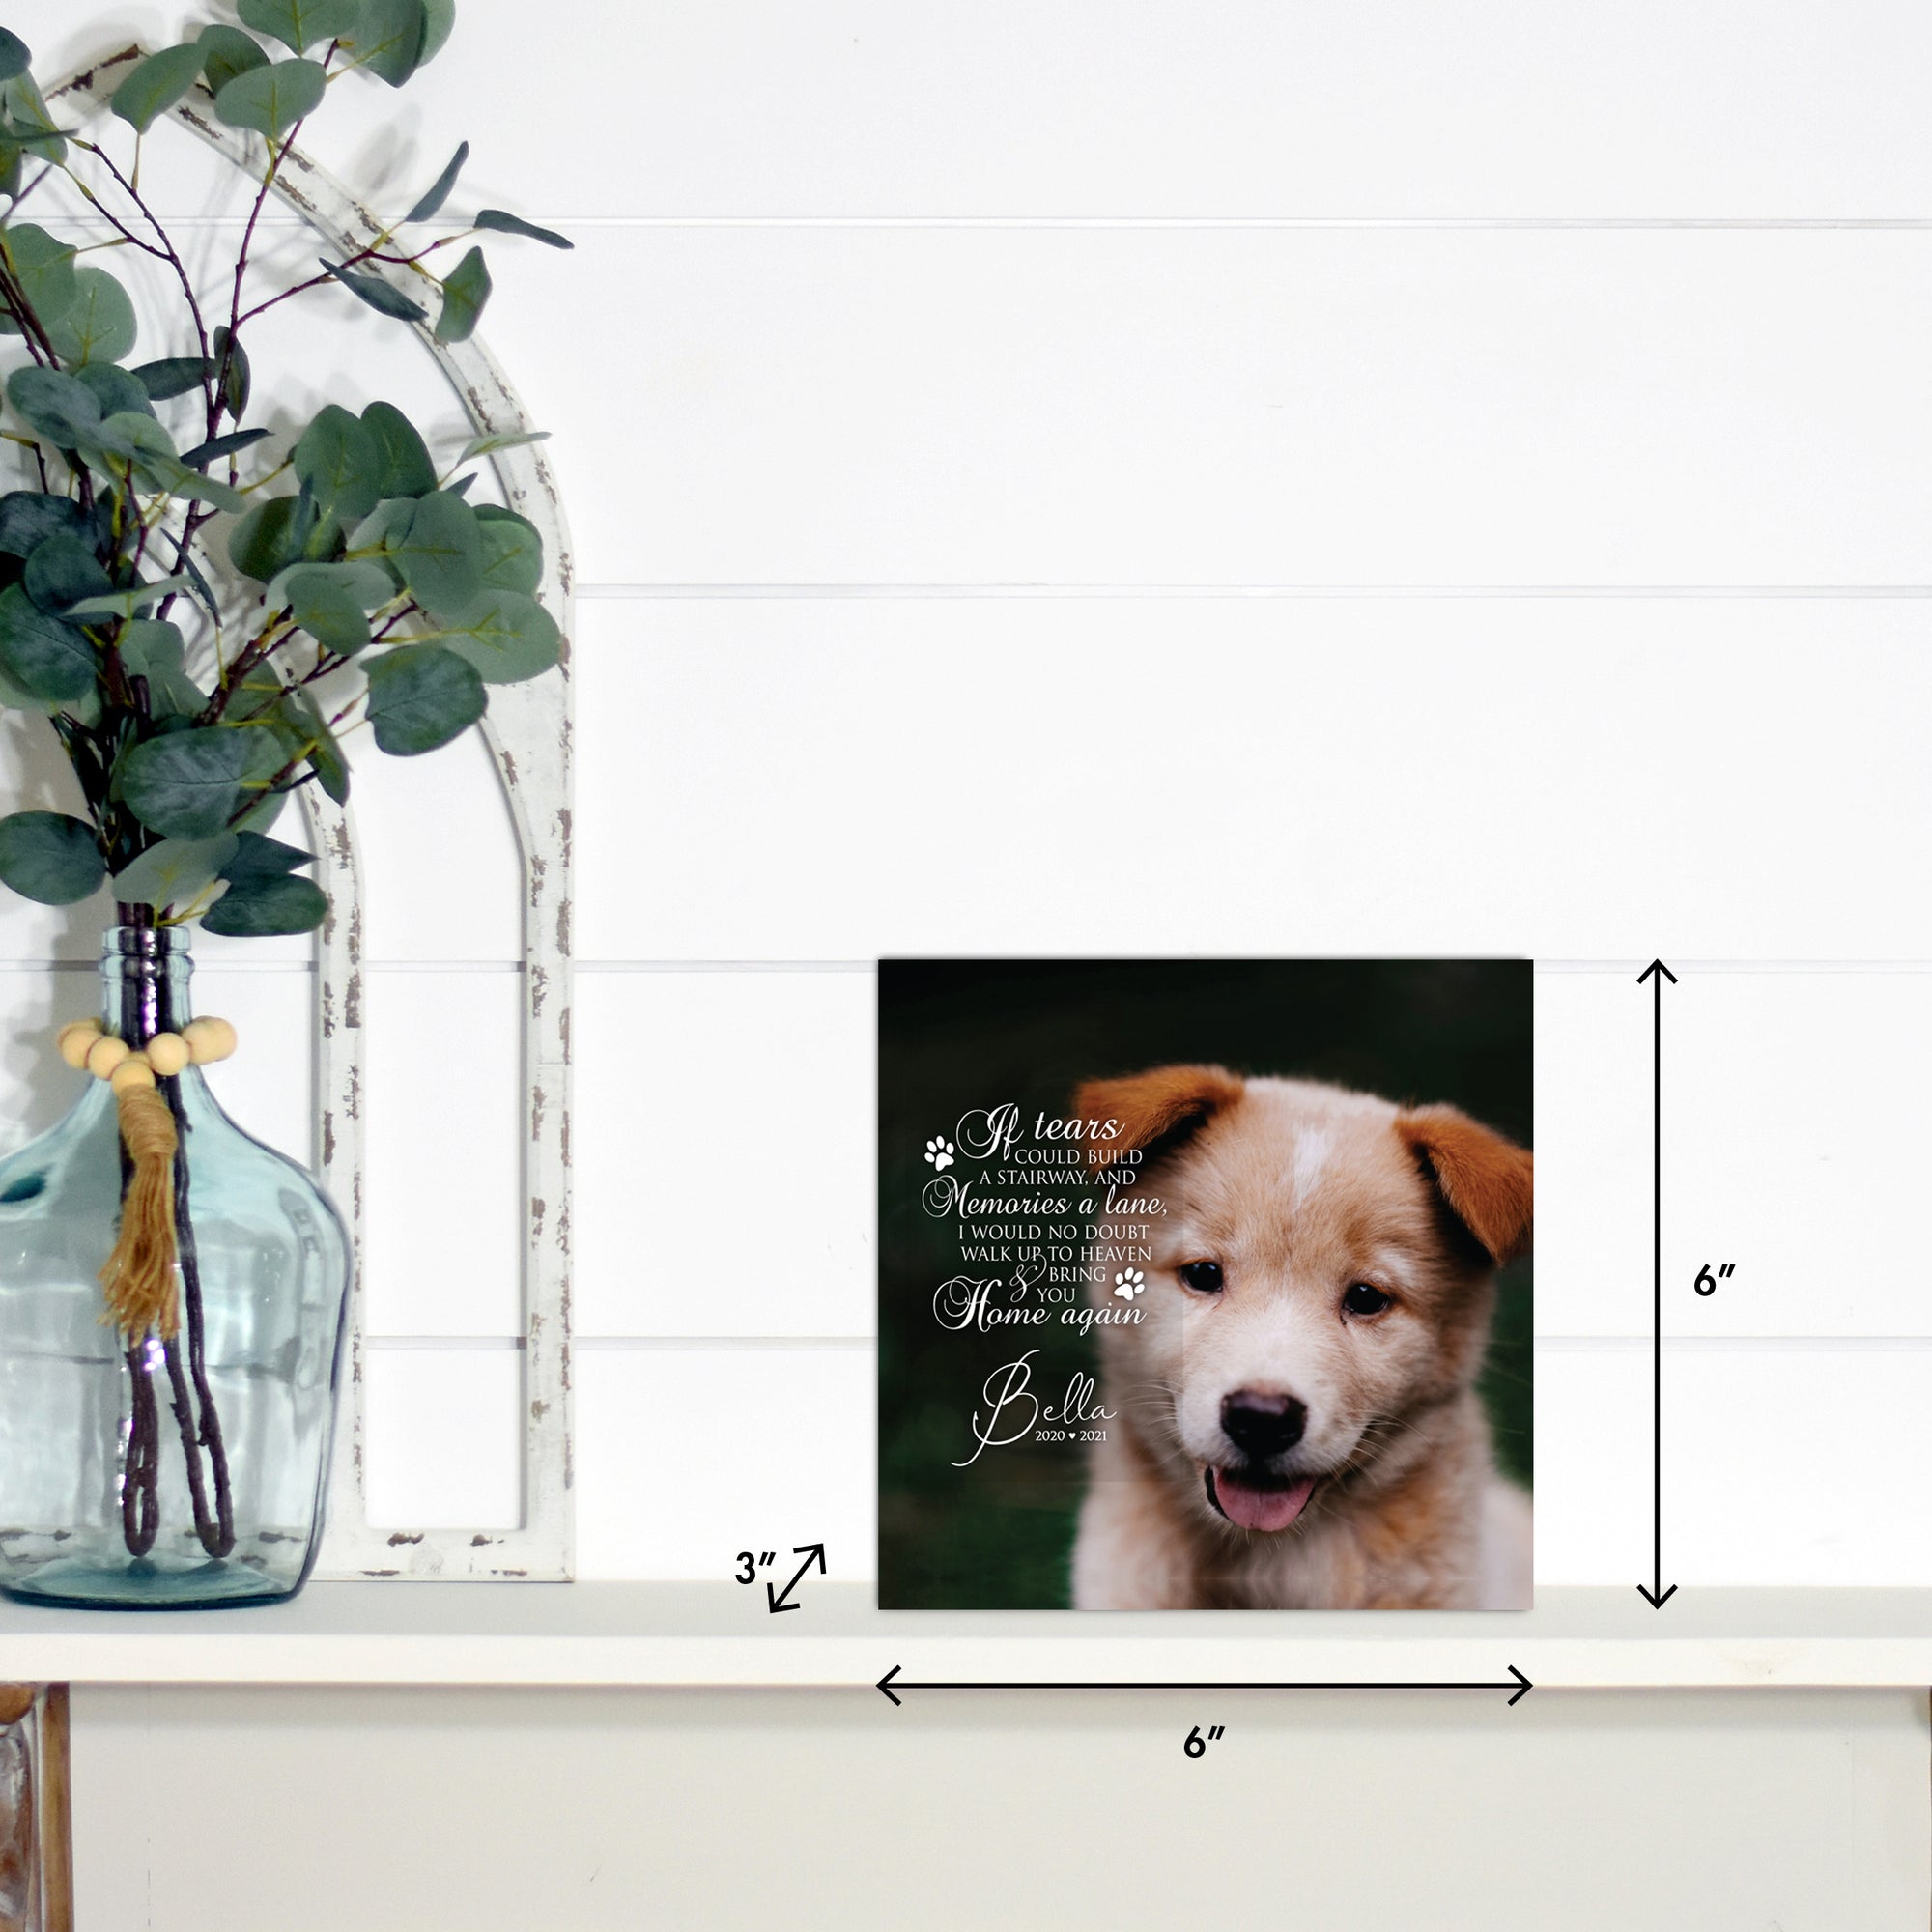 Pet Memorial Custom Photo Shadow Box Cremation Urn - If Tears Could Build A Stairway